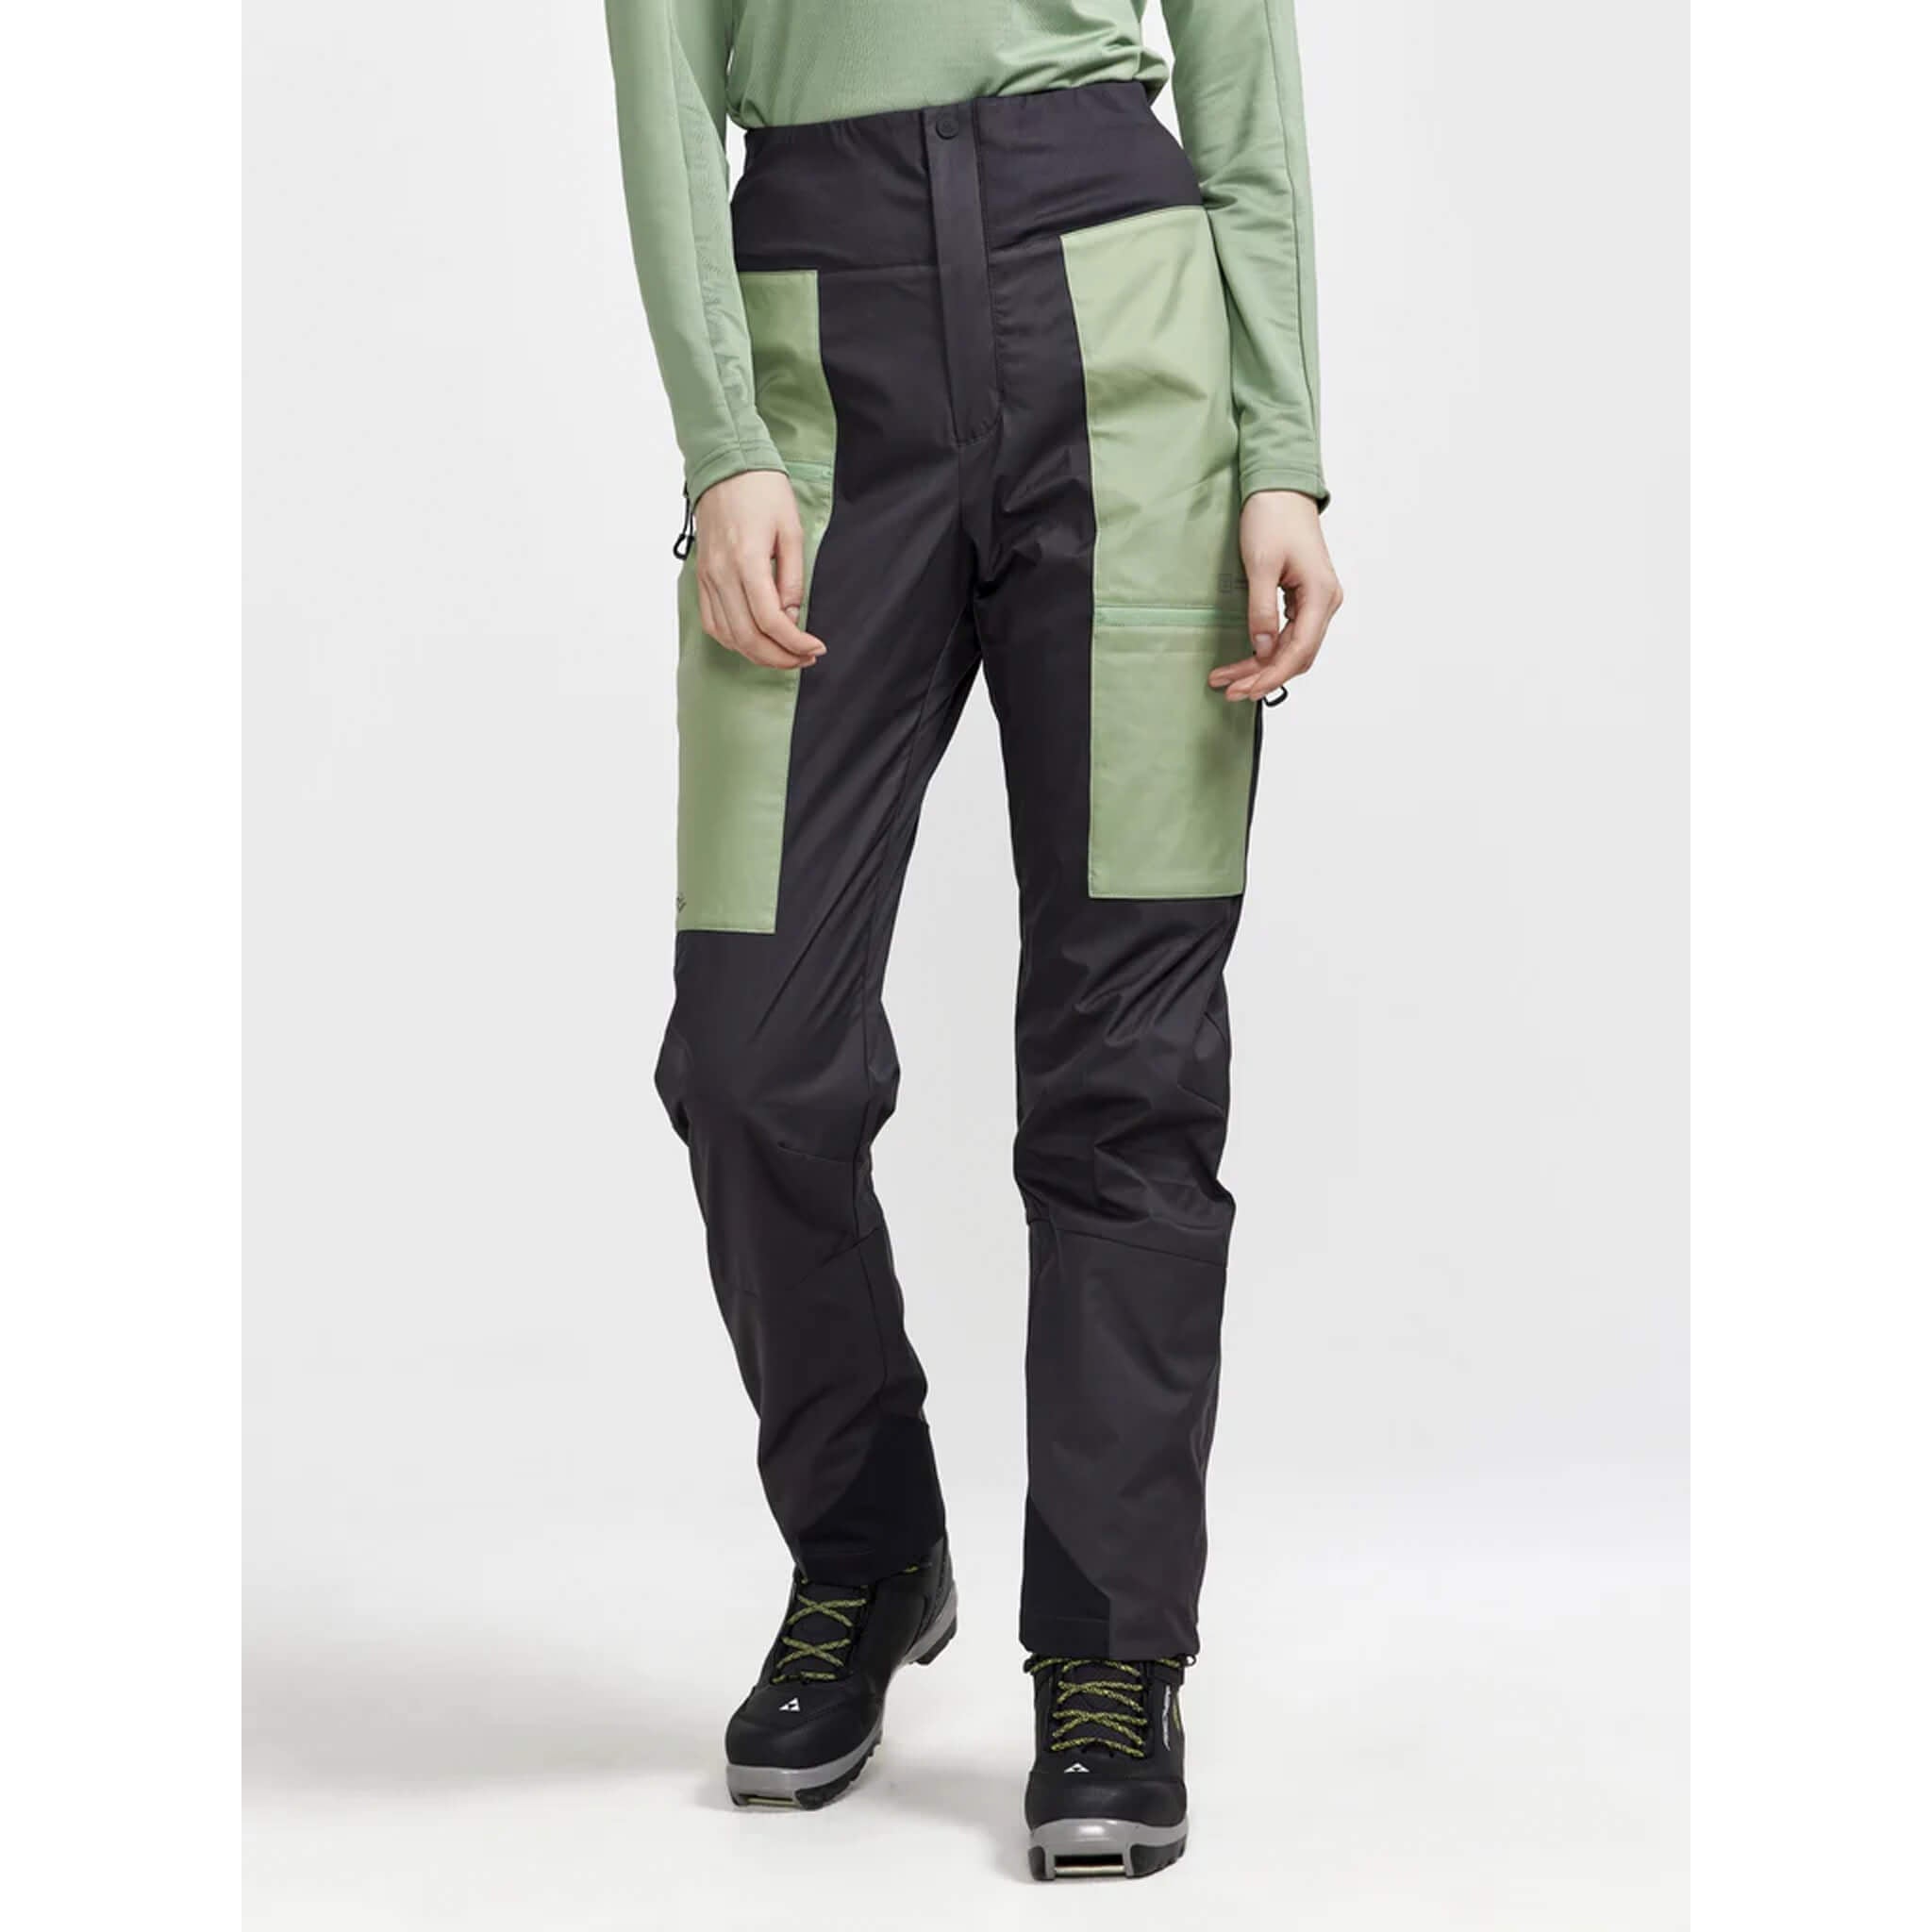 Craft Adv Backcountry Pant W